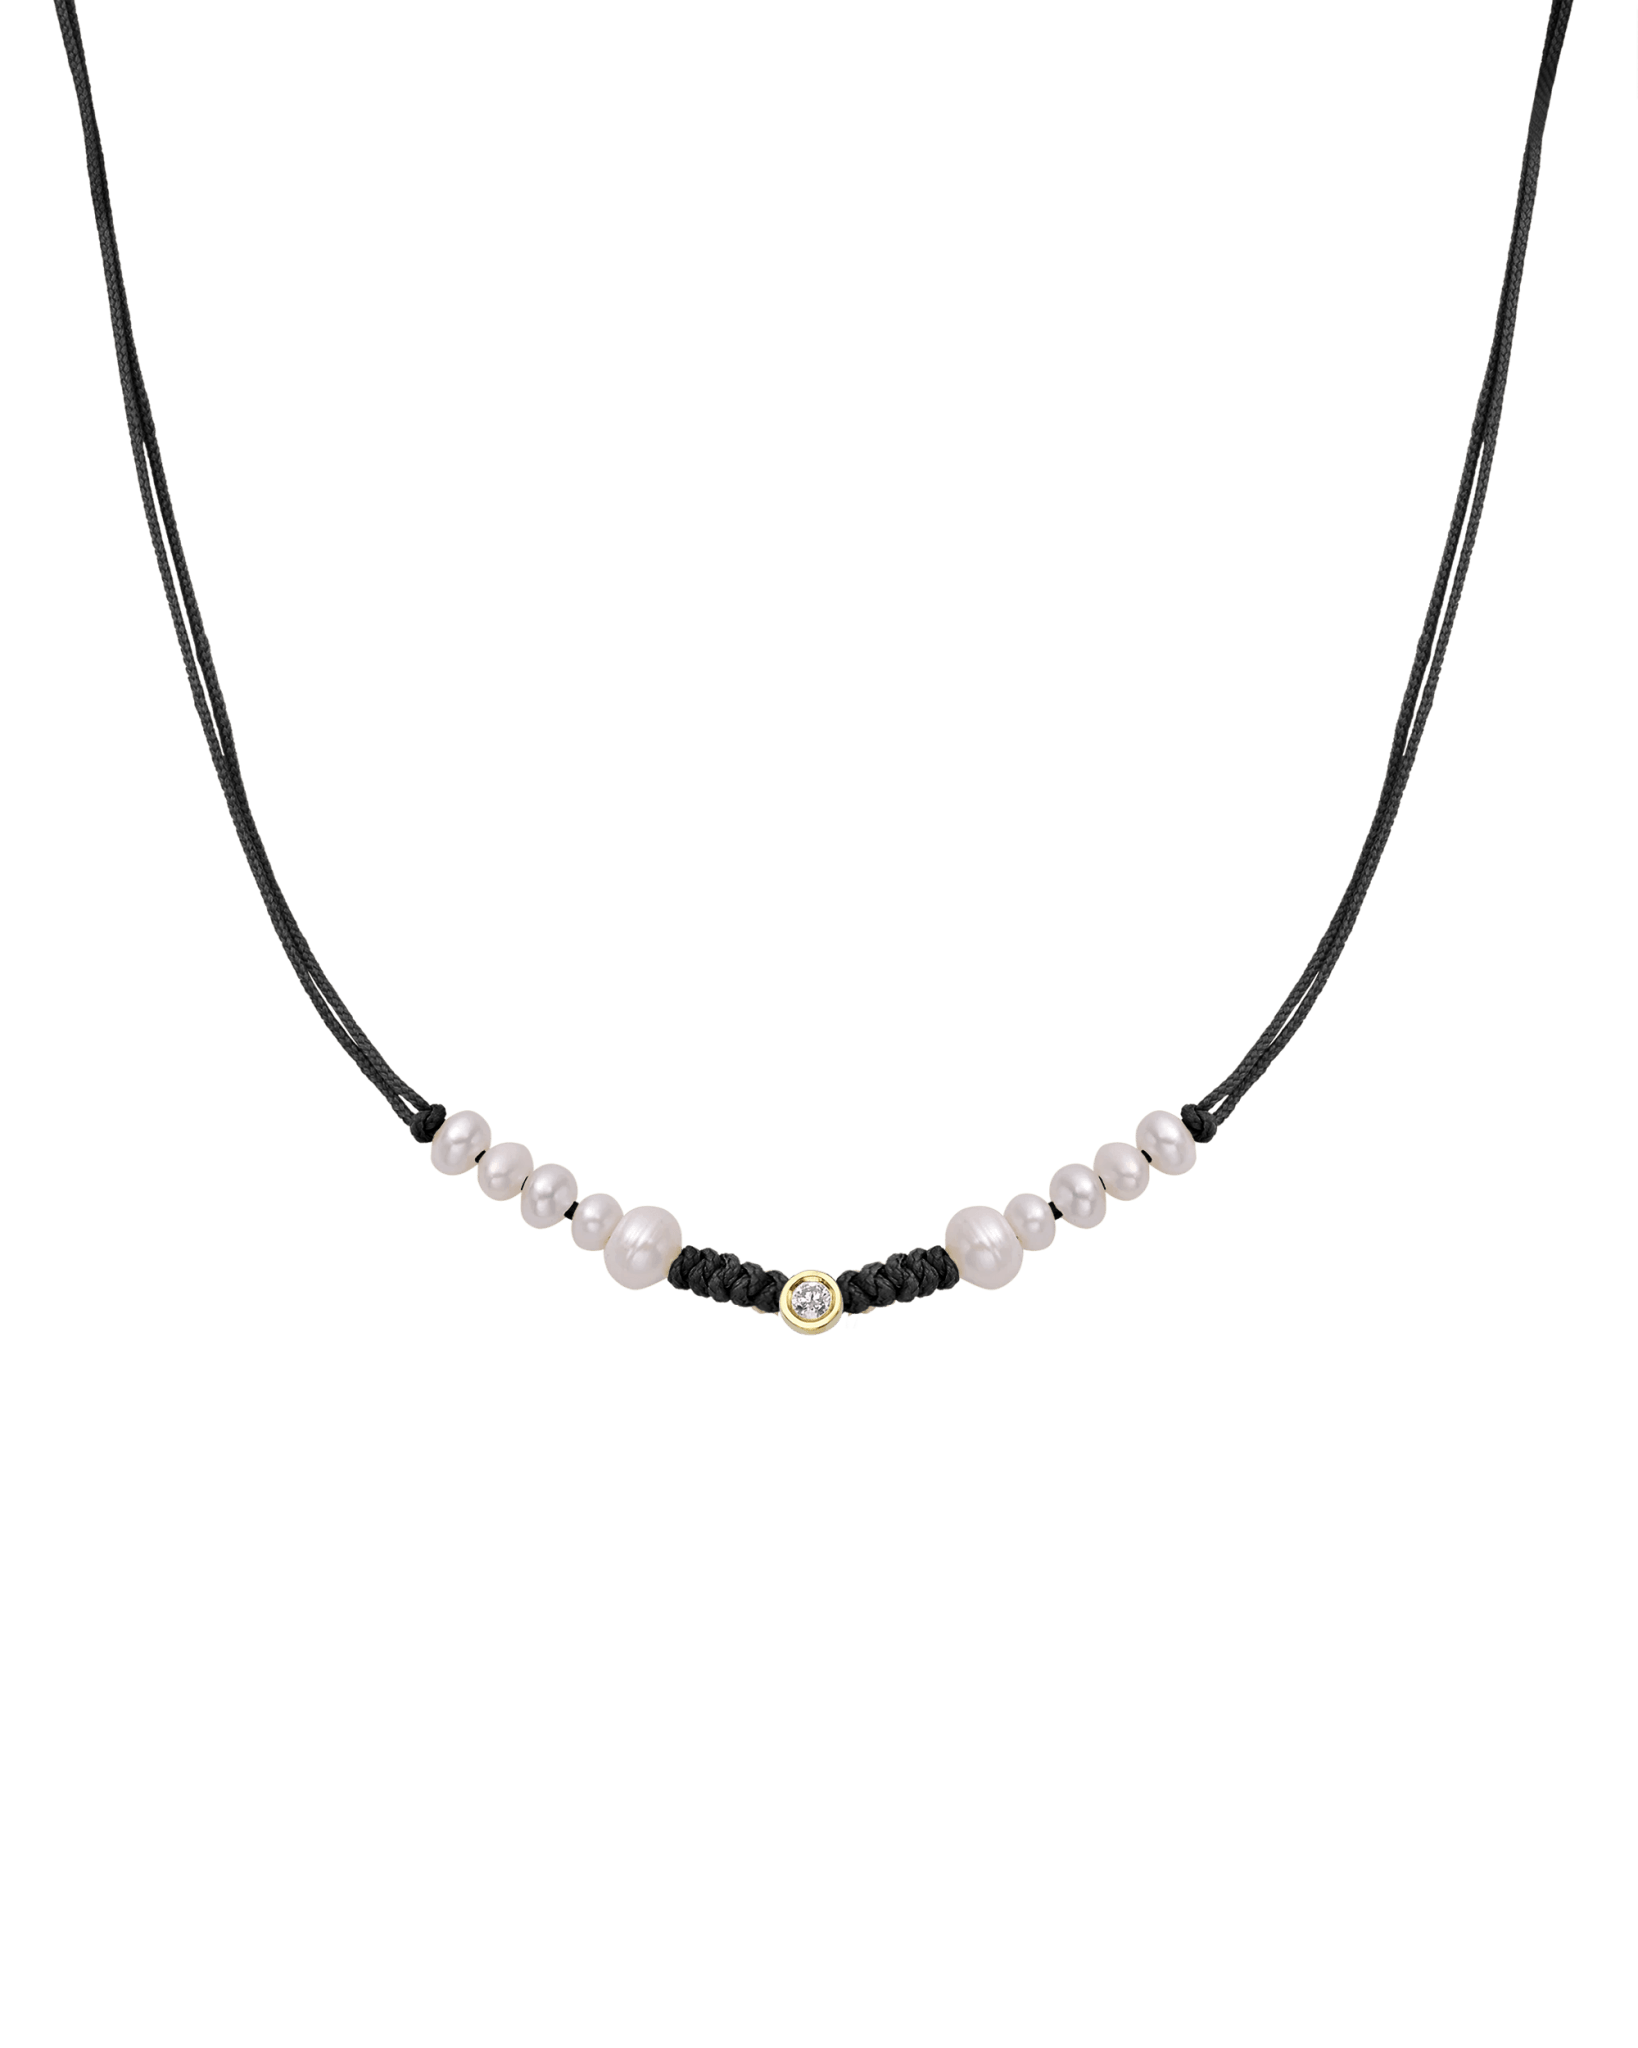 Ten Natural Pearl String of Love Necklace - 14K Yellow Gold Necklaces 14K Solid Gold Black Medium: 0.04ct 